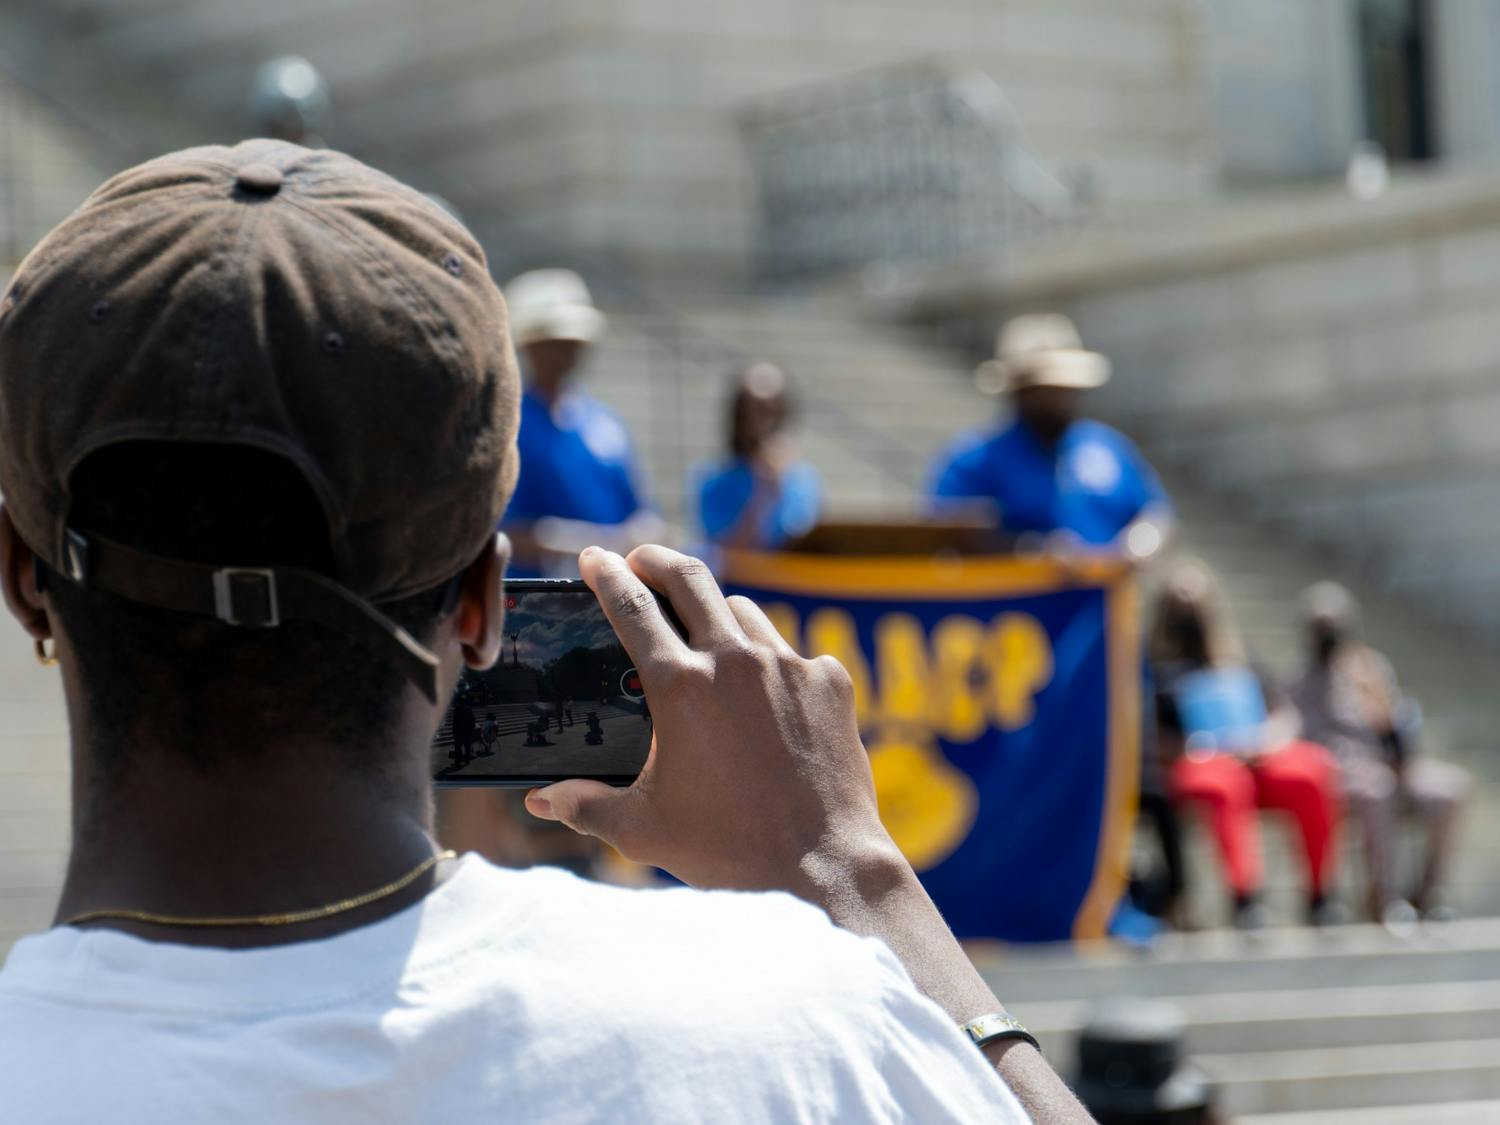 A rally attendee takes a picture during a speech by Courtney McClain, the Youth and College President for the NAACP chapter at the University of South Carolina on April 23, 2022. "I think we just need far, far, far more young people ... just getting involved in these issues and taking more direct action," McClain said.